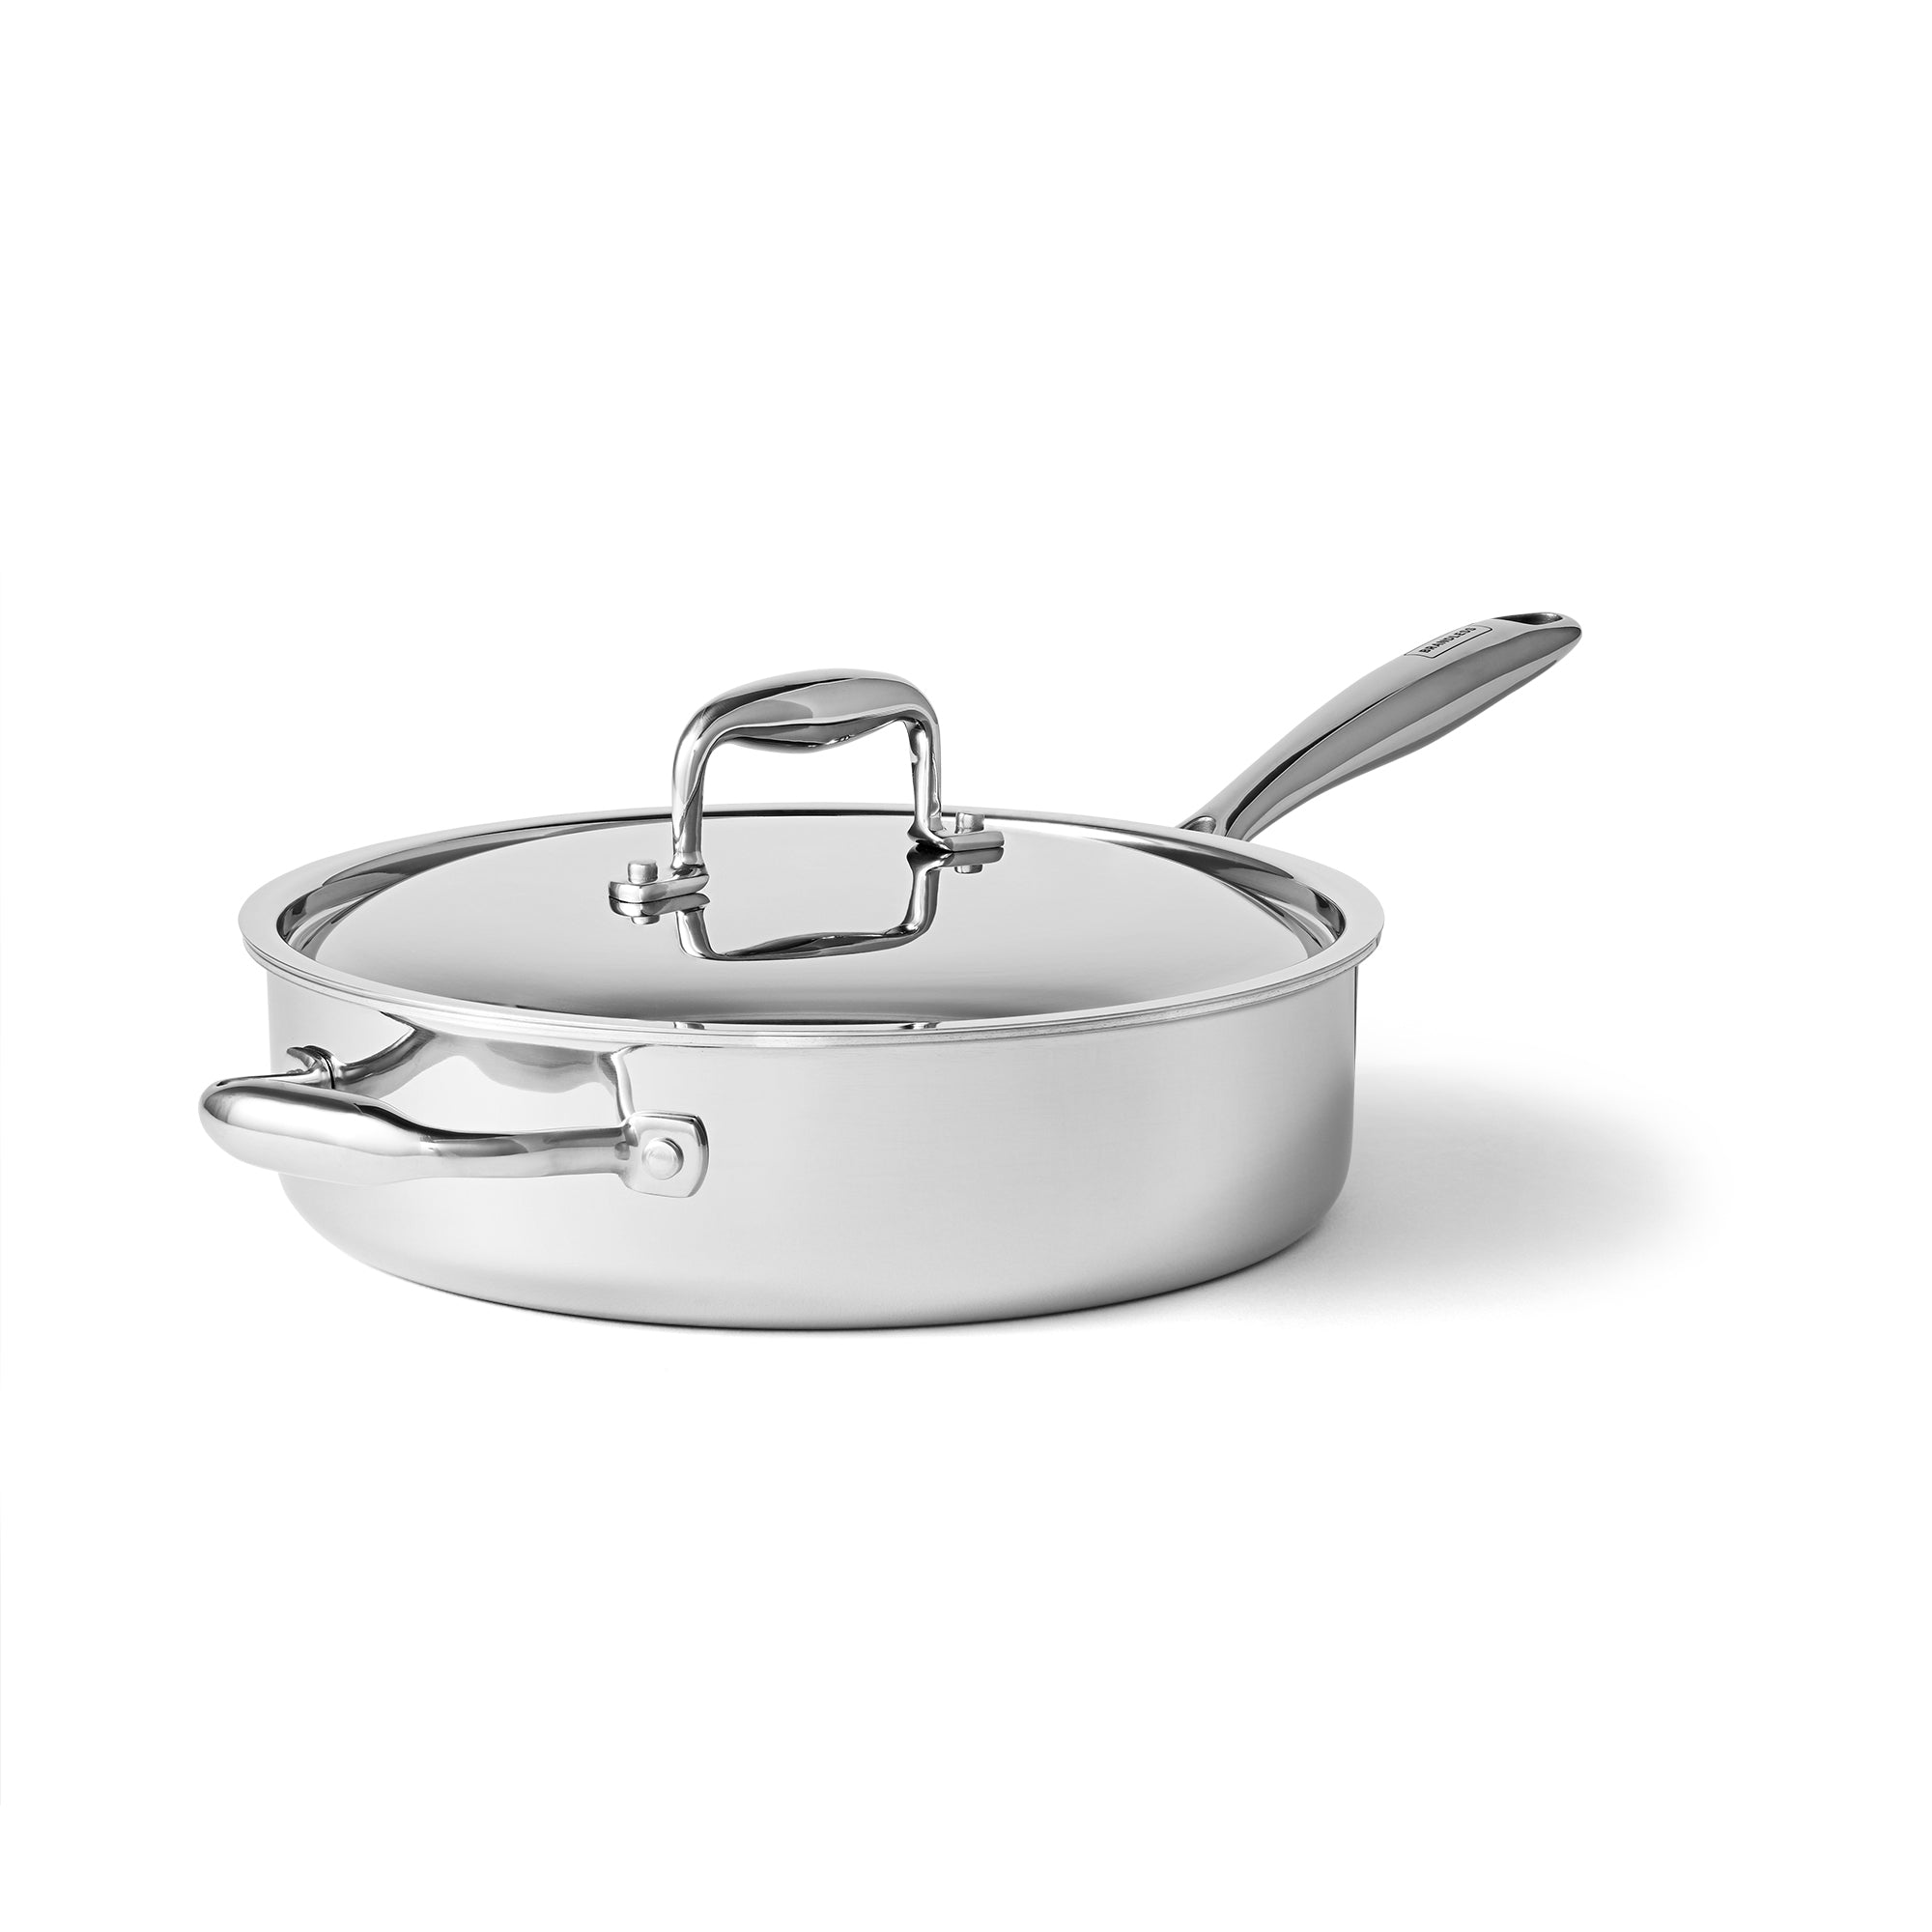 Brandless 4 Quart Stainless Steel Saute Pan with Lid